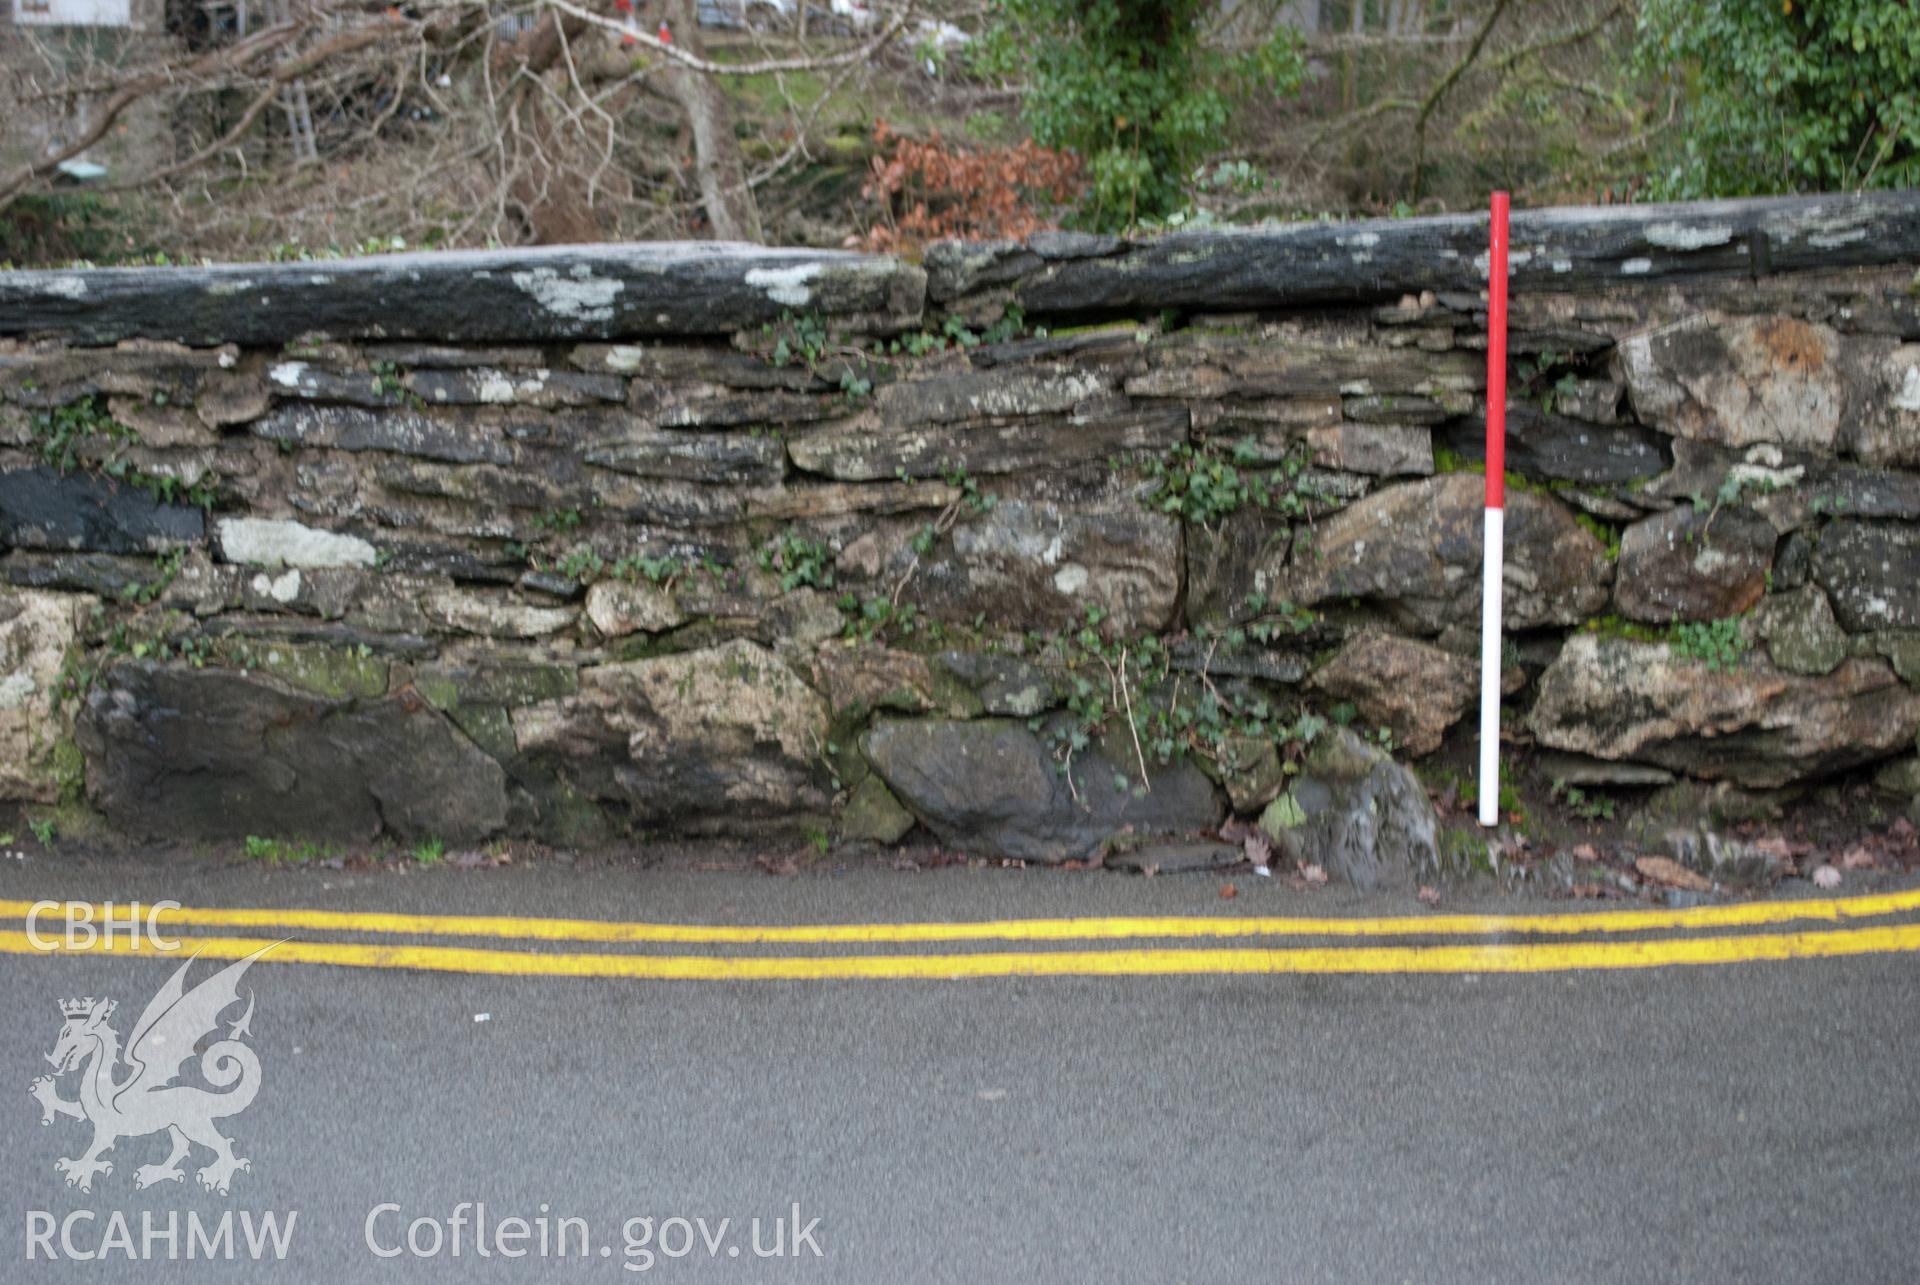 View of damaged coping stone at northwest corner of Pont y Pair. Digital photograph taken for Archaeological Watching Brief at Pont y Pair, Betws y Coed, 2019. Gwynedd Archaeological Trust Project ref G2587.